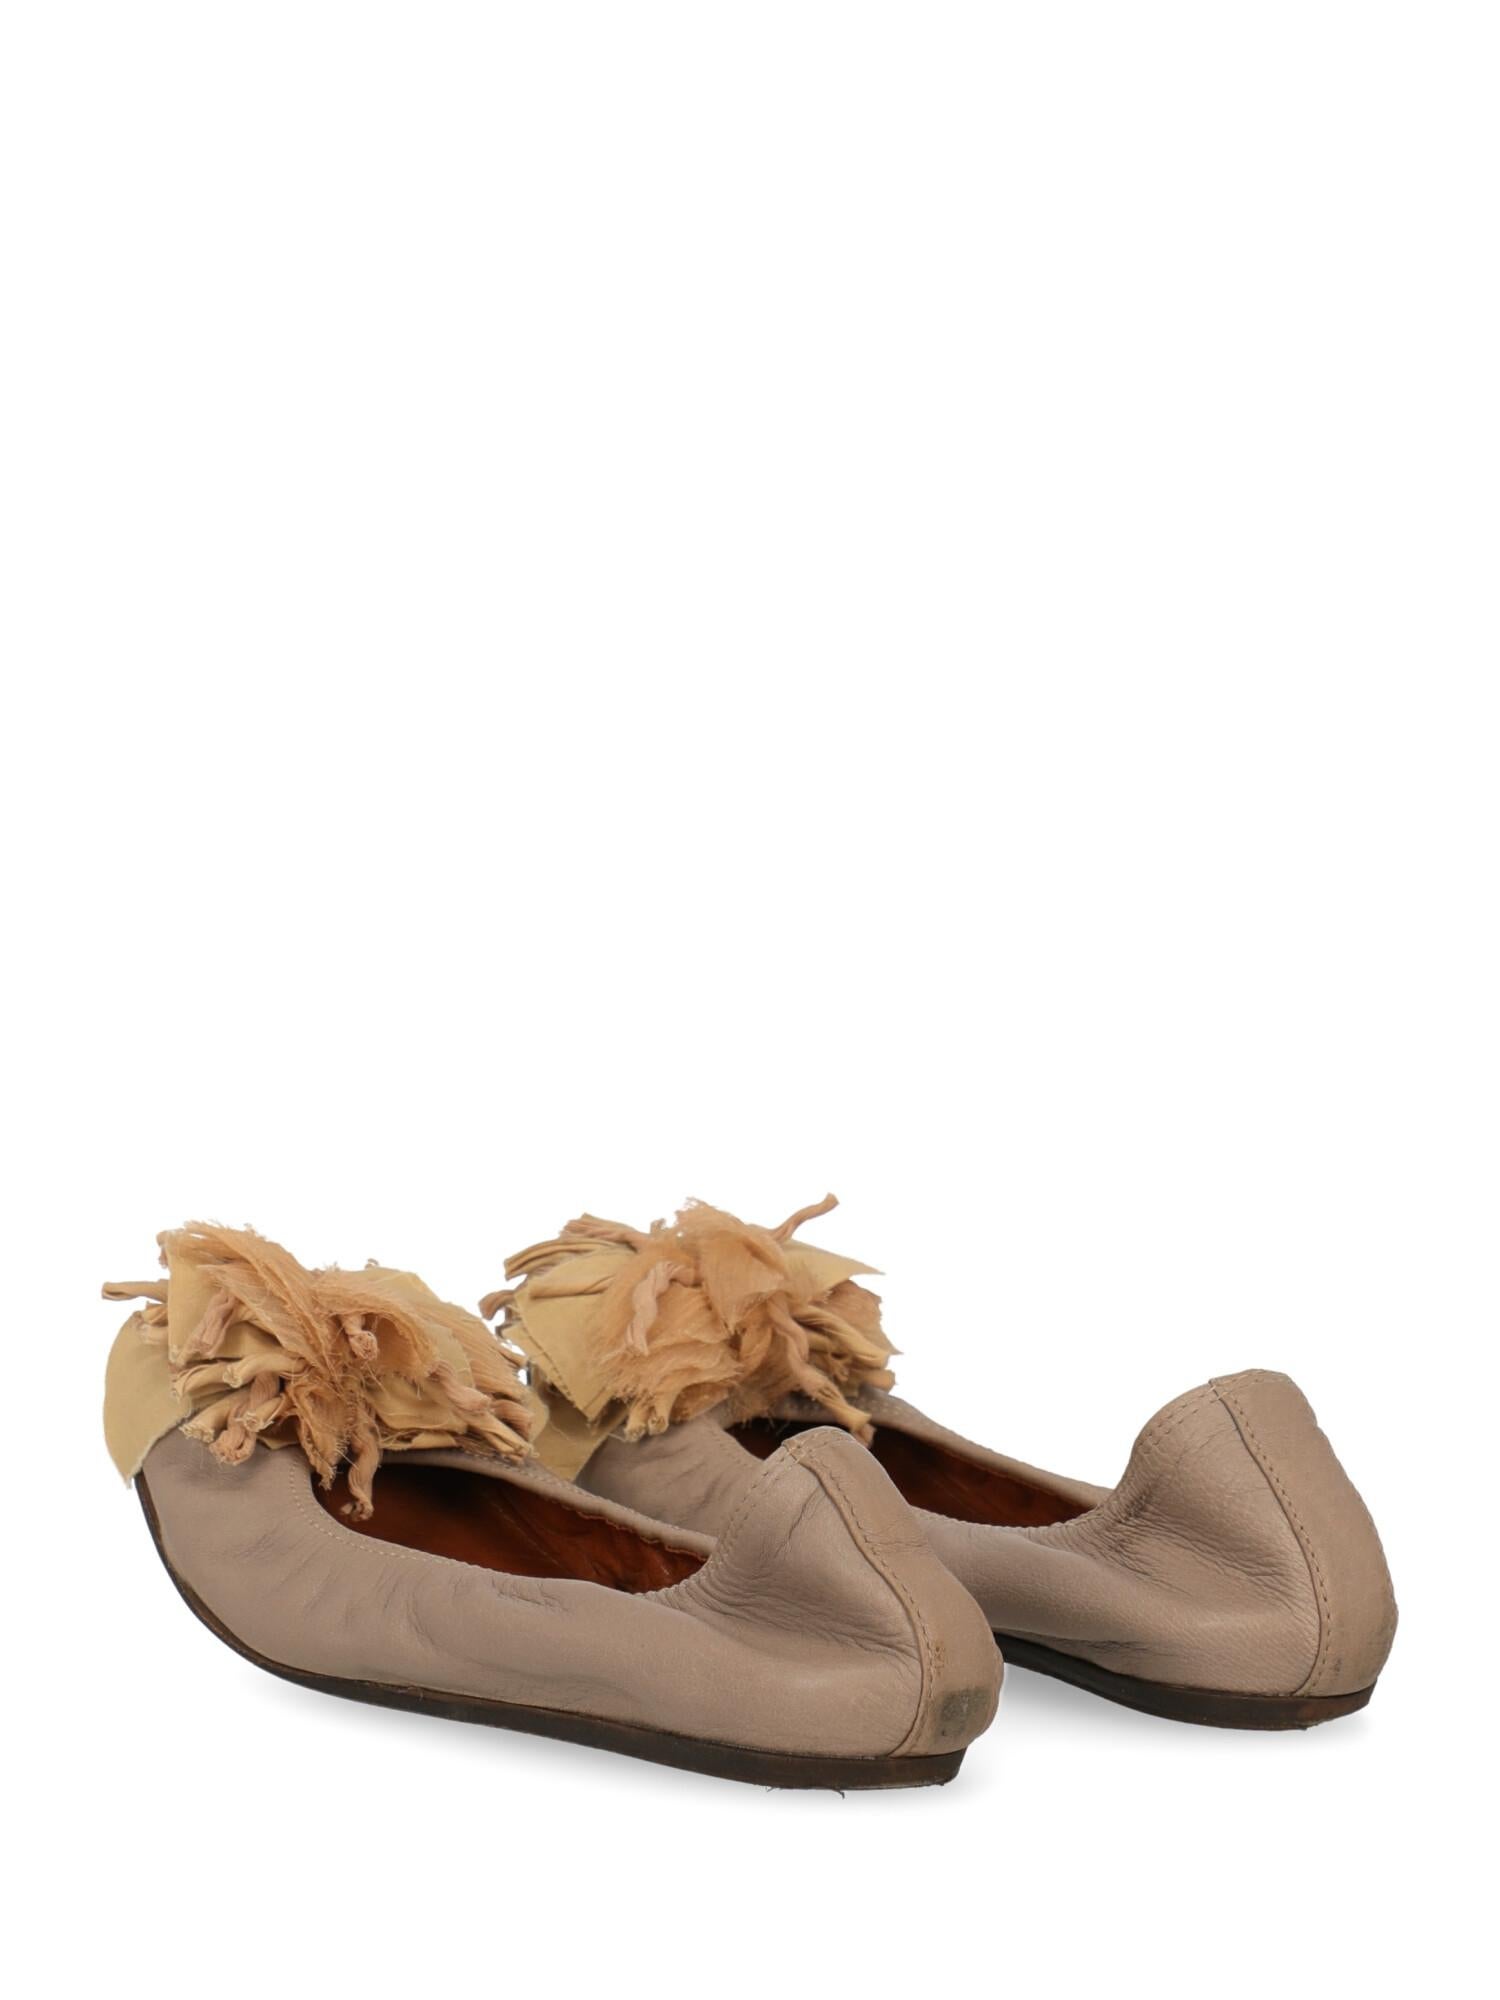 beige leather flats